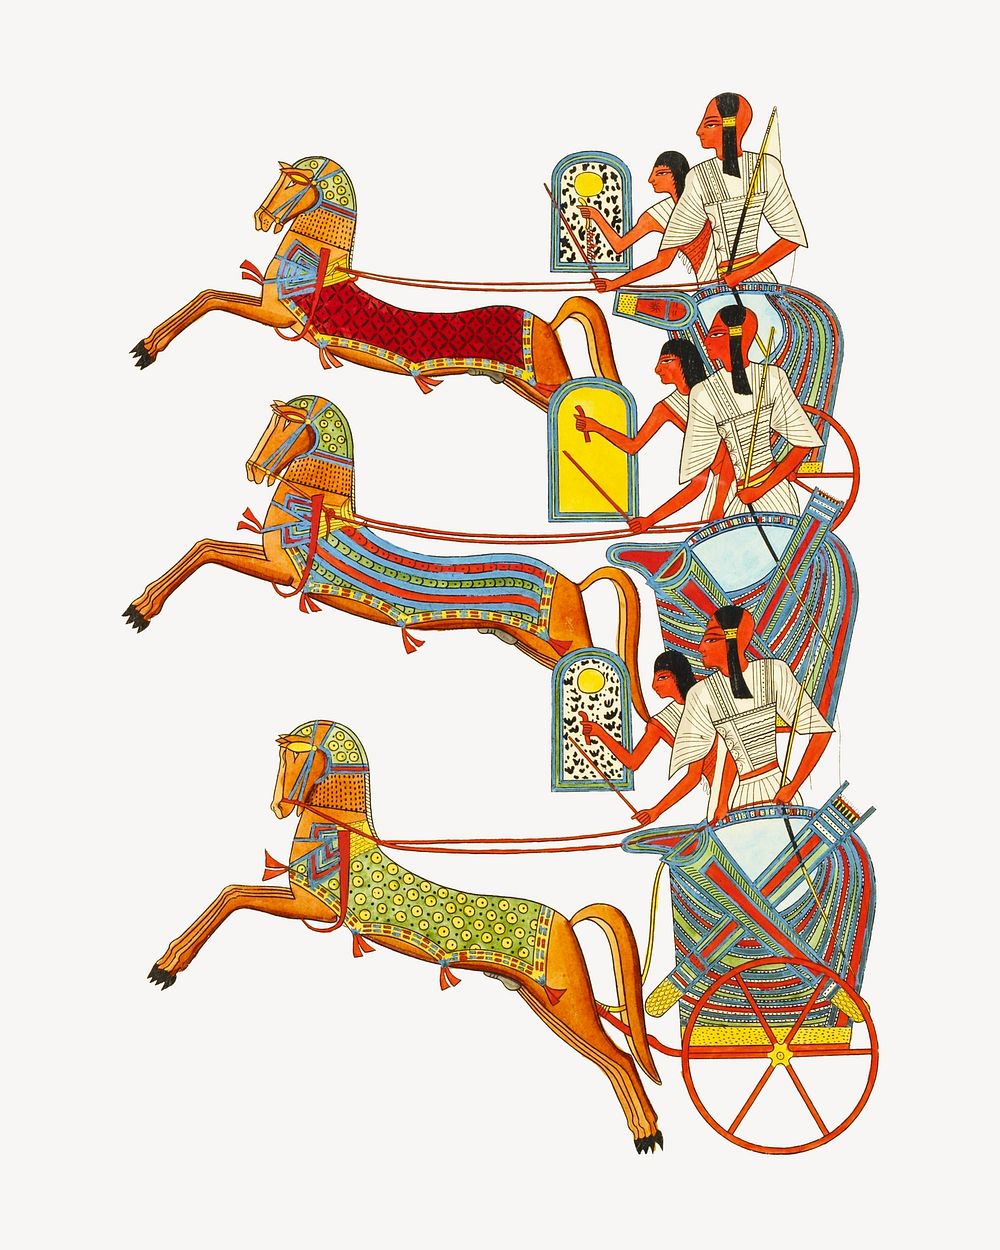 Egyptian chariot vintage illustration. Remixed by rawpixel.